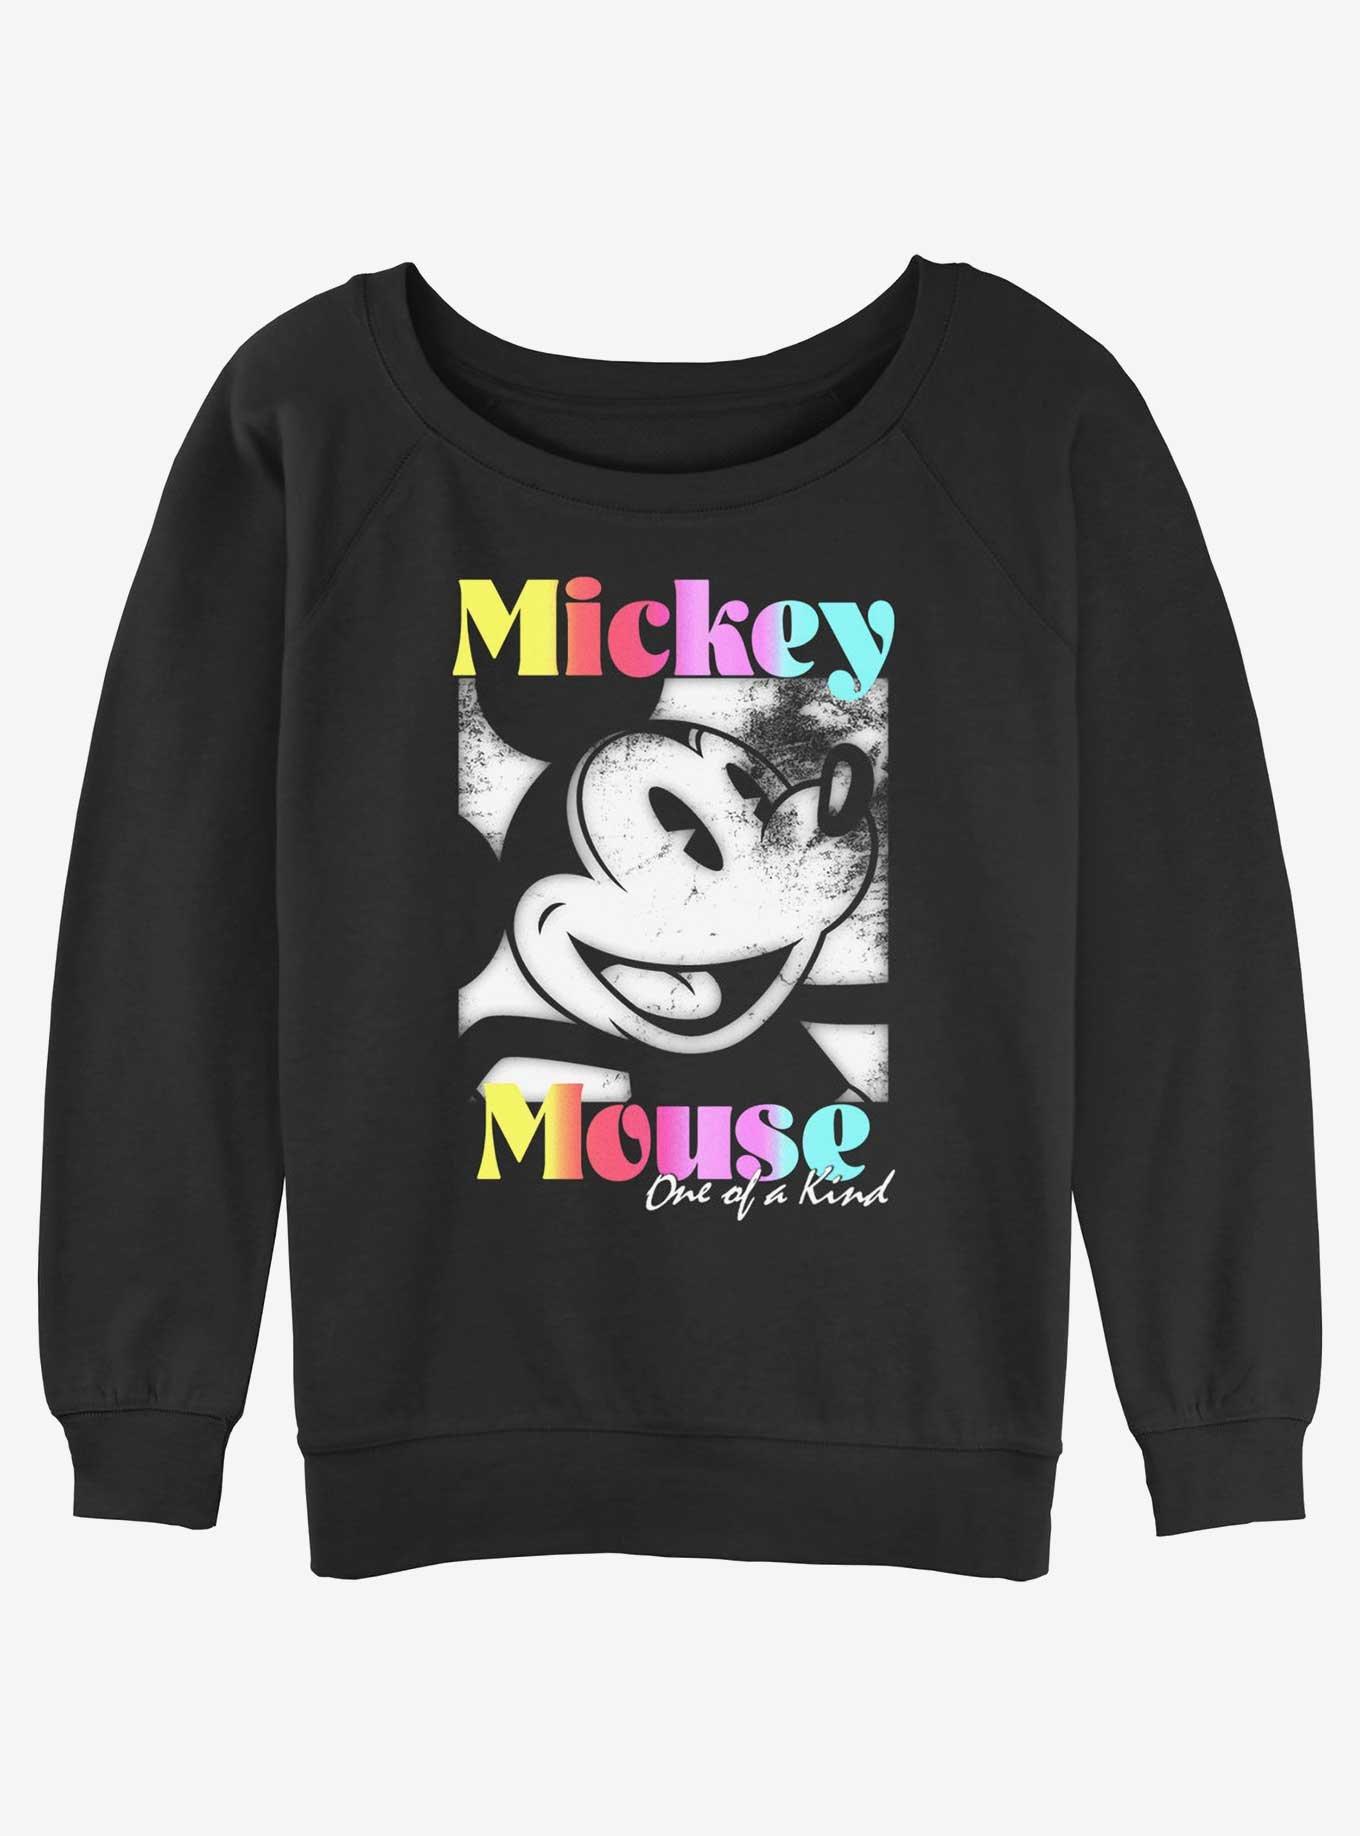 Disney Mickey Mouse one of a kind distressed Girls Slouchy Sweatshirt, BLACK, hi-res